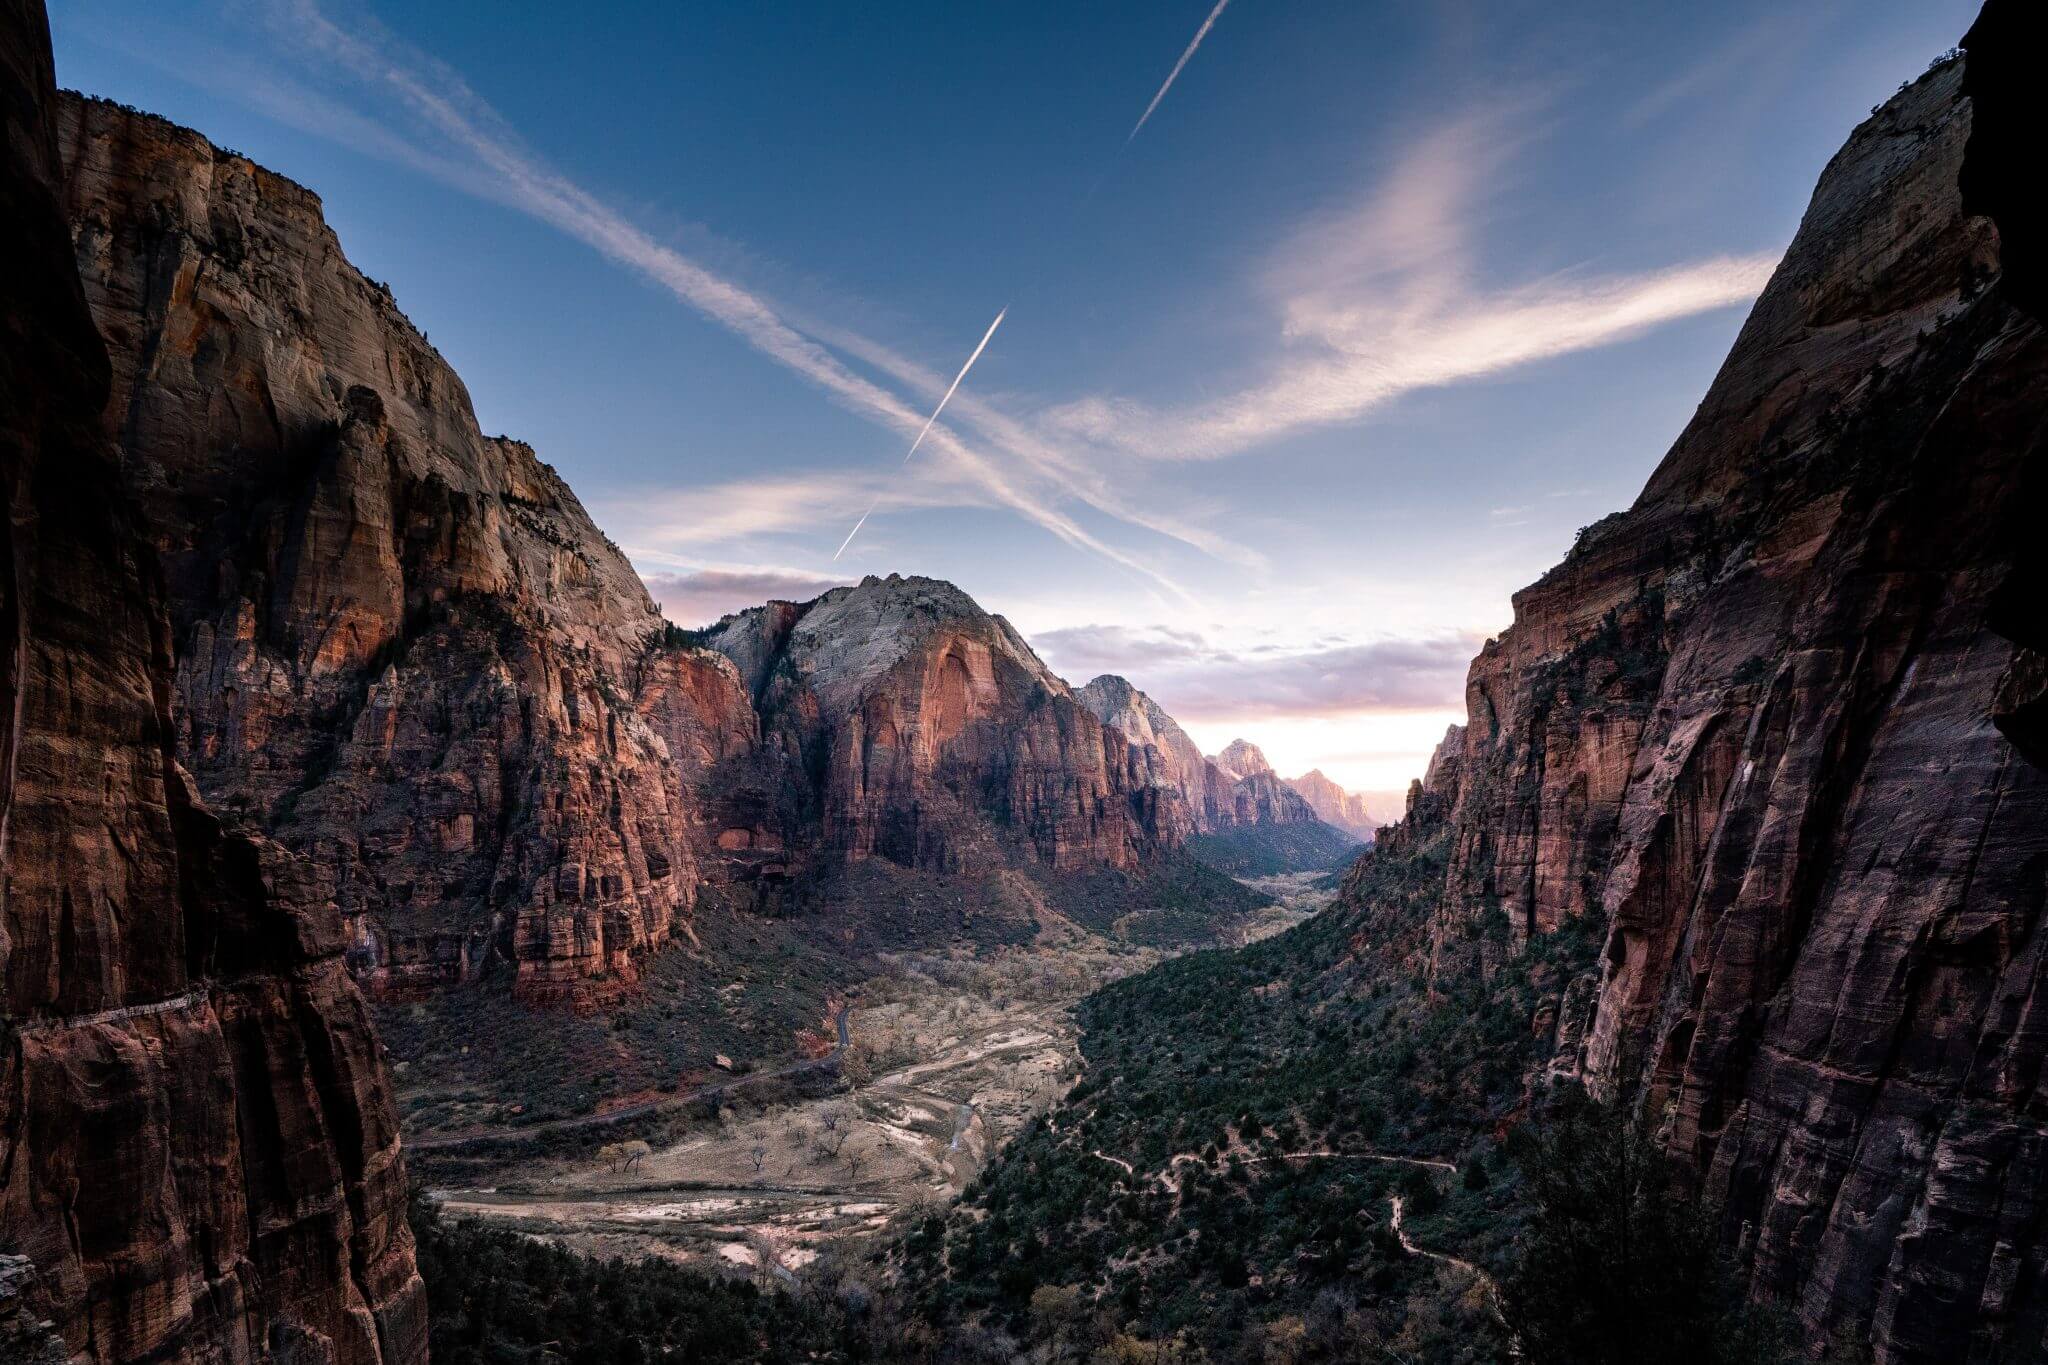 One Day In Zion National Park